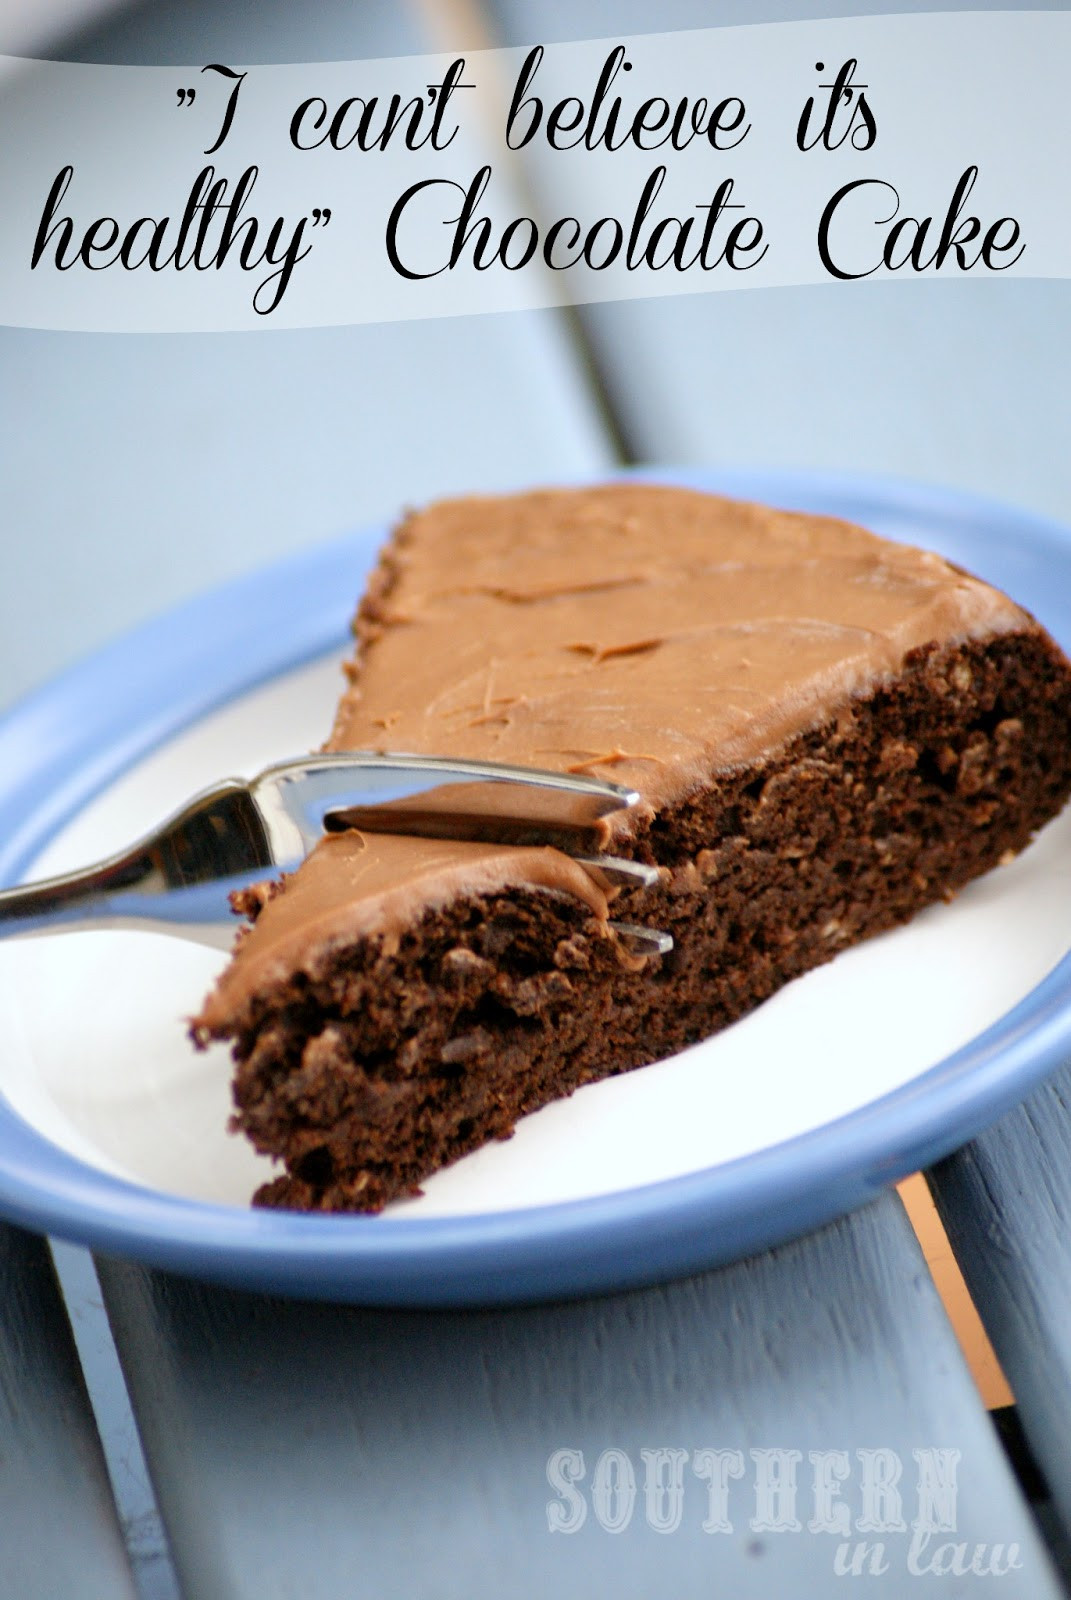 Low Calorie Chocolate Recipes
 Southern In Law Recipe Healthy Chocolate Cake Vegan too